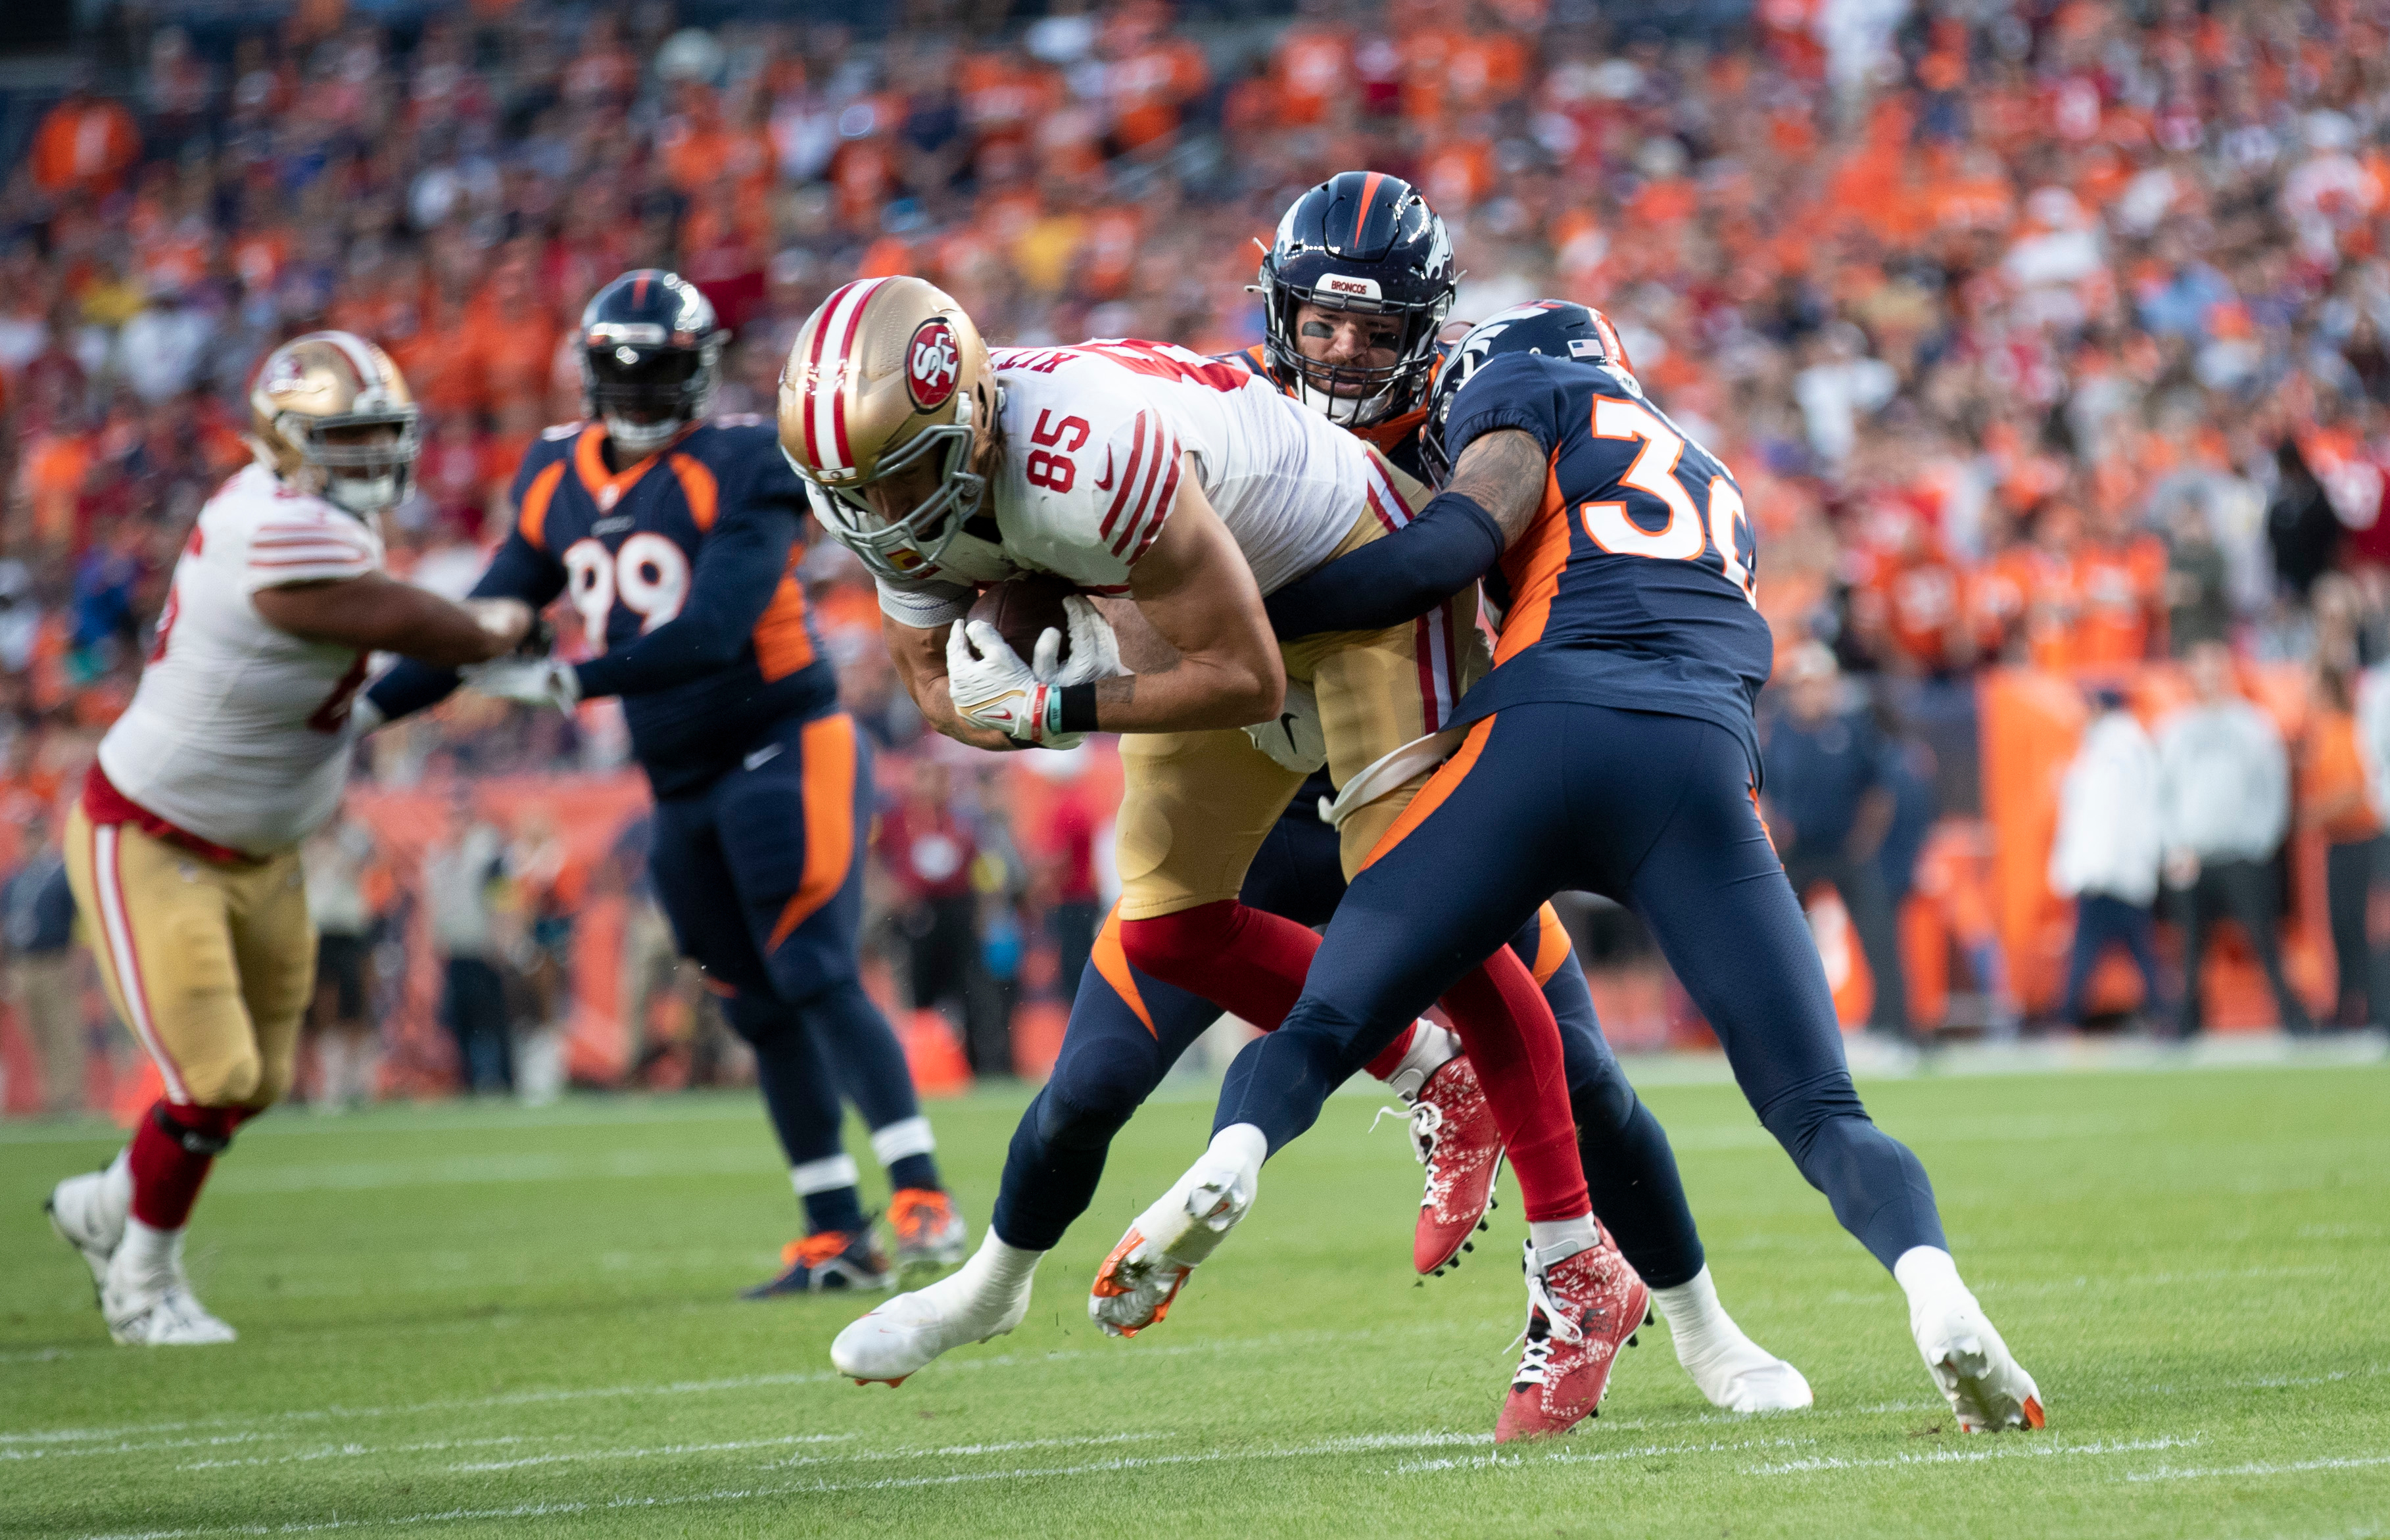 George Kittle #85 of the San Francisco 49ers makes a catch during the game against the Denver Broncos at Empower Field At Mile High on September 25, 2022 in Denver, Colorado.